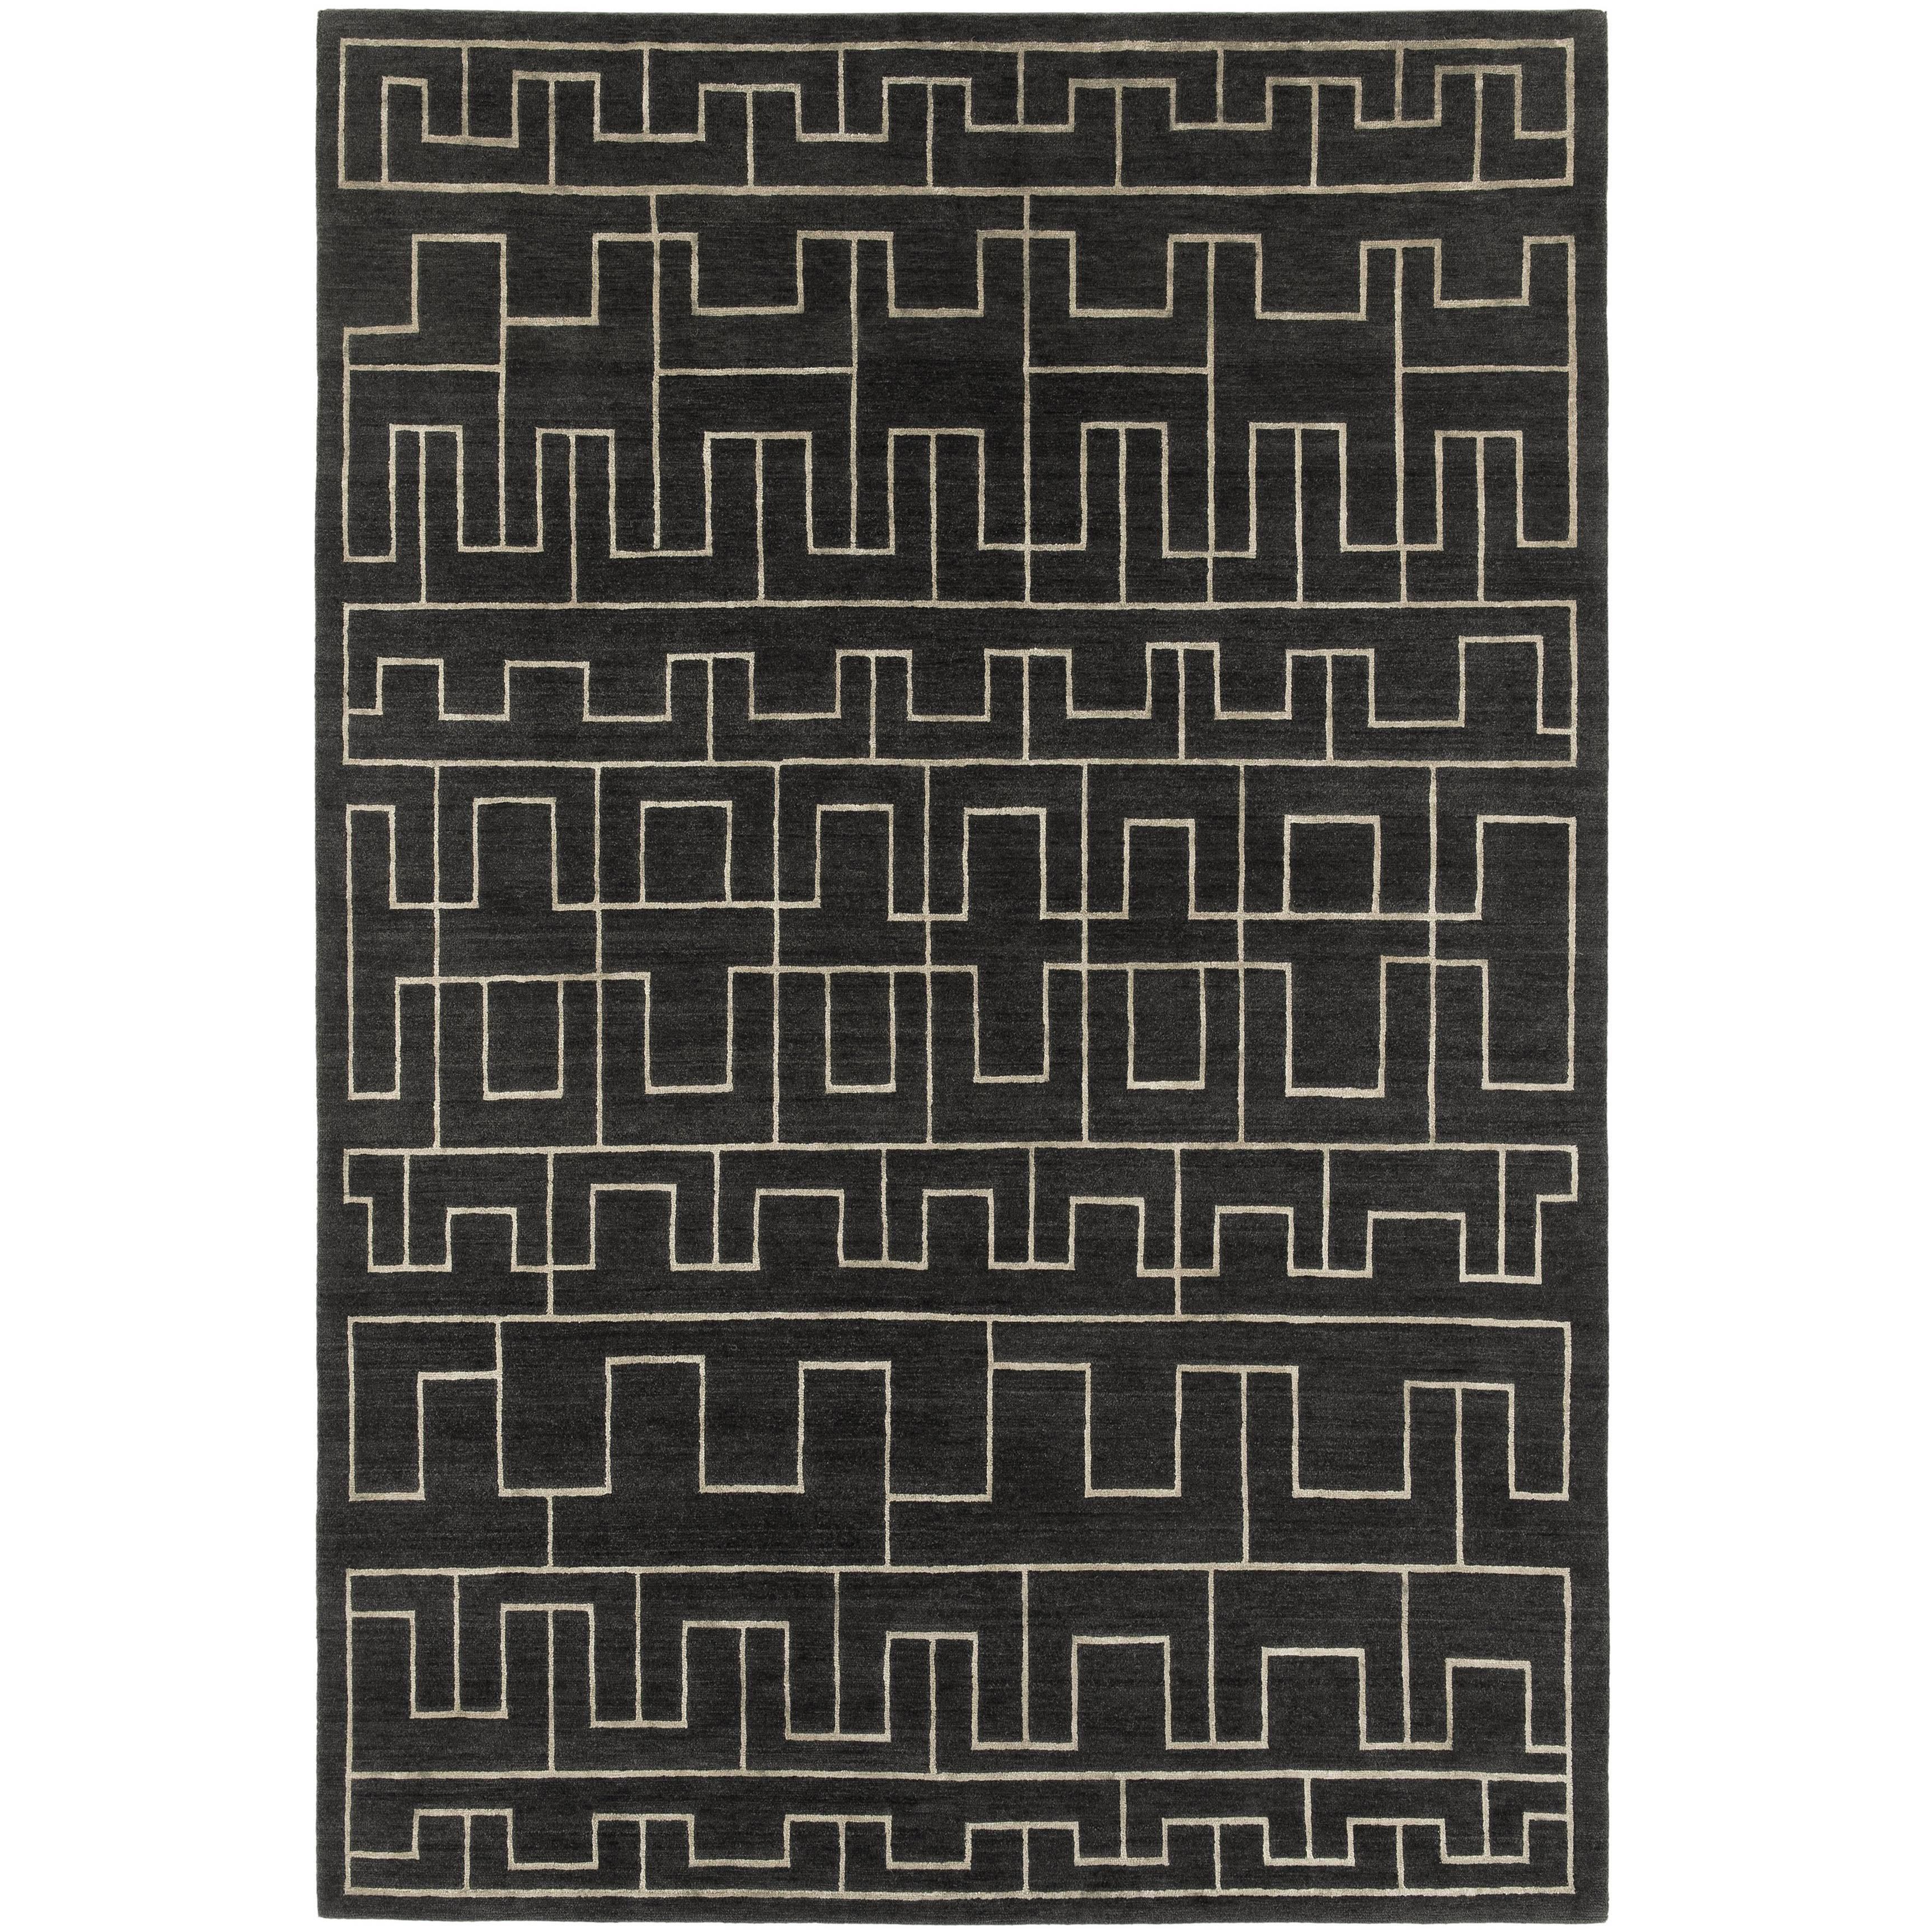 Contemporary Tibetan Rug Hand-Knotted in Nepal Dark Grey Natural Linen